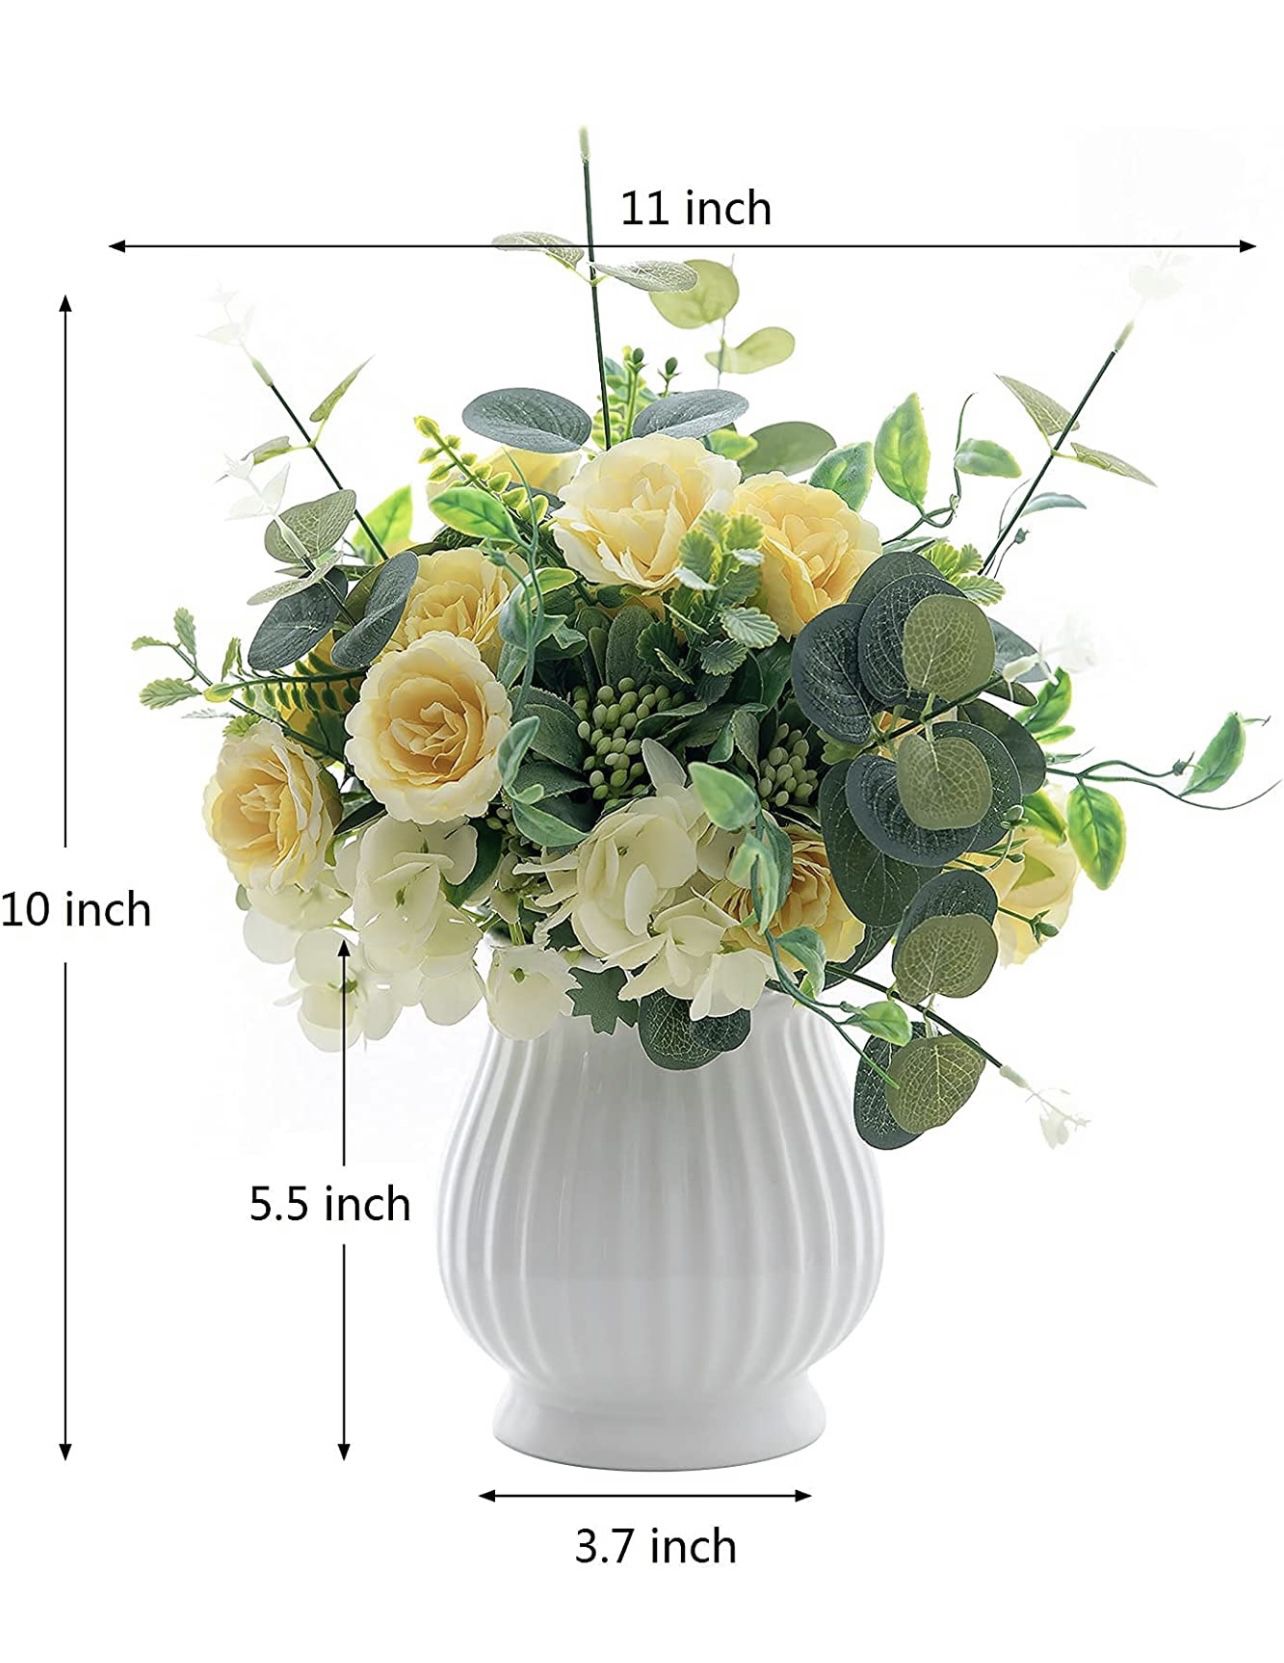 Artificial Flowers in Vase Silk Rose Bouquets Flowers Arrangements for Kitchen Table Centerpiece, Fake Faux Silk Flowers for Room Decor